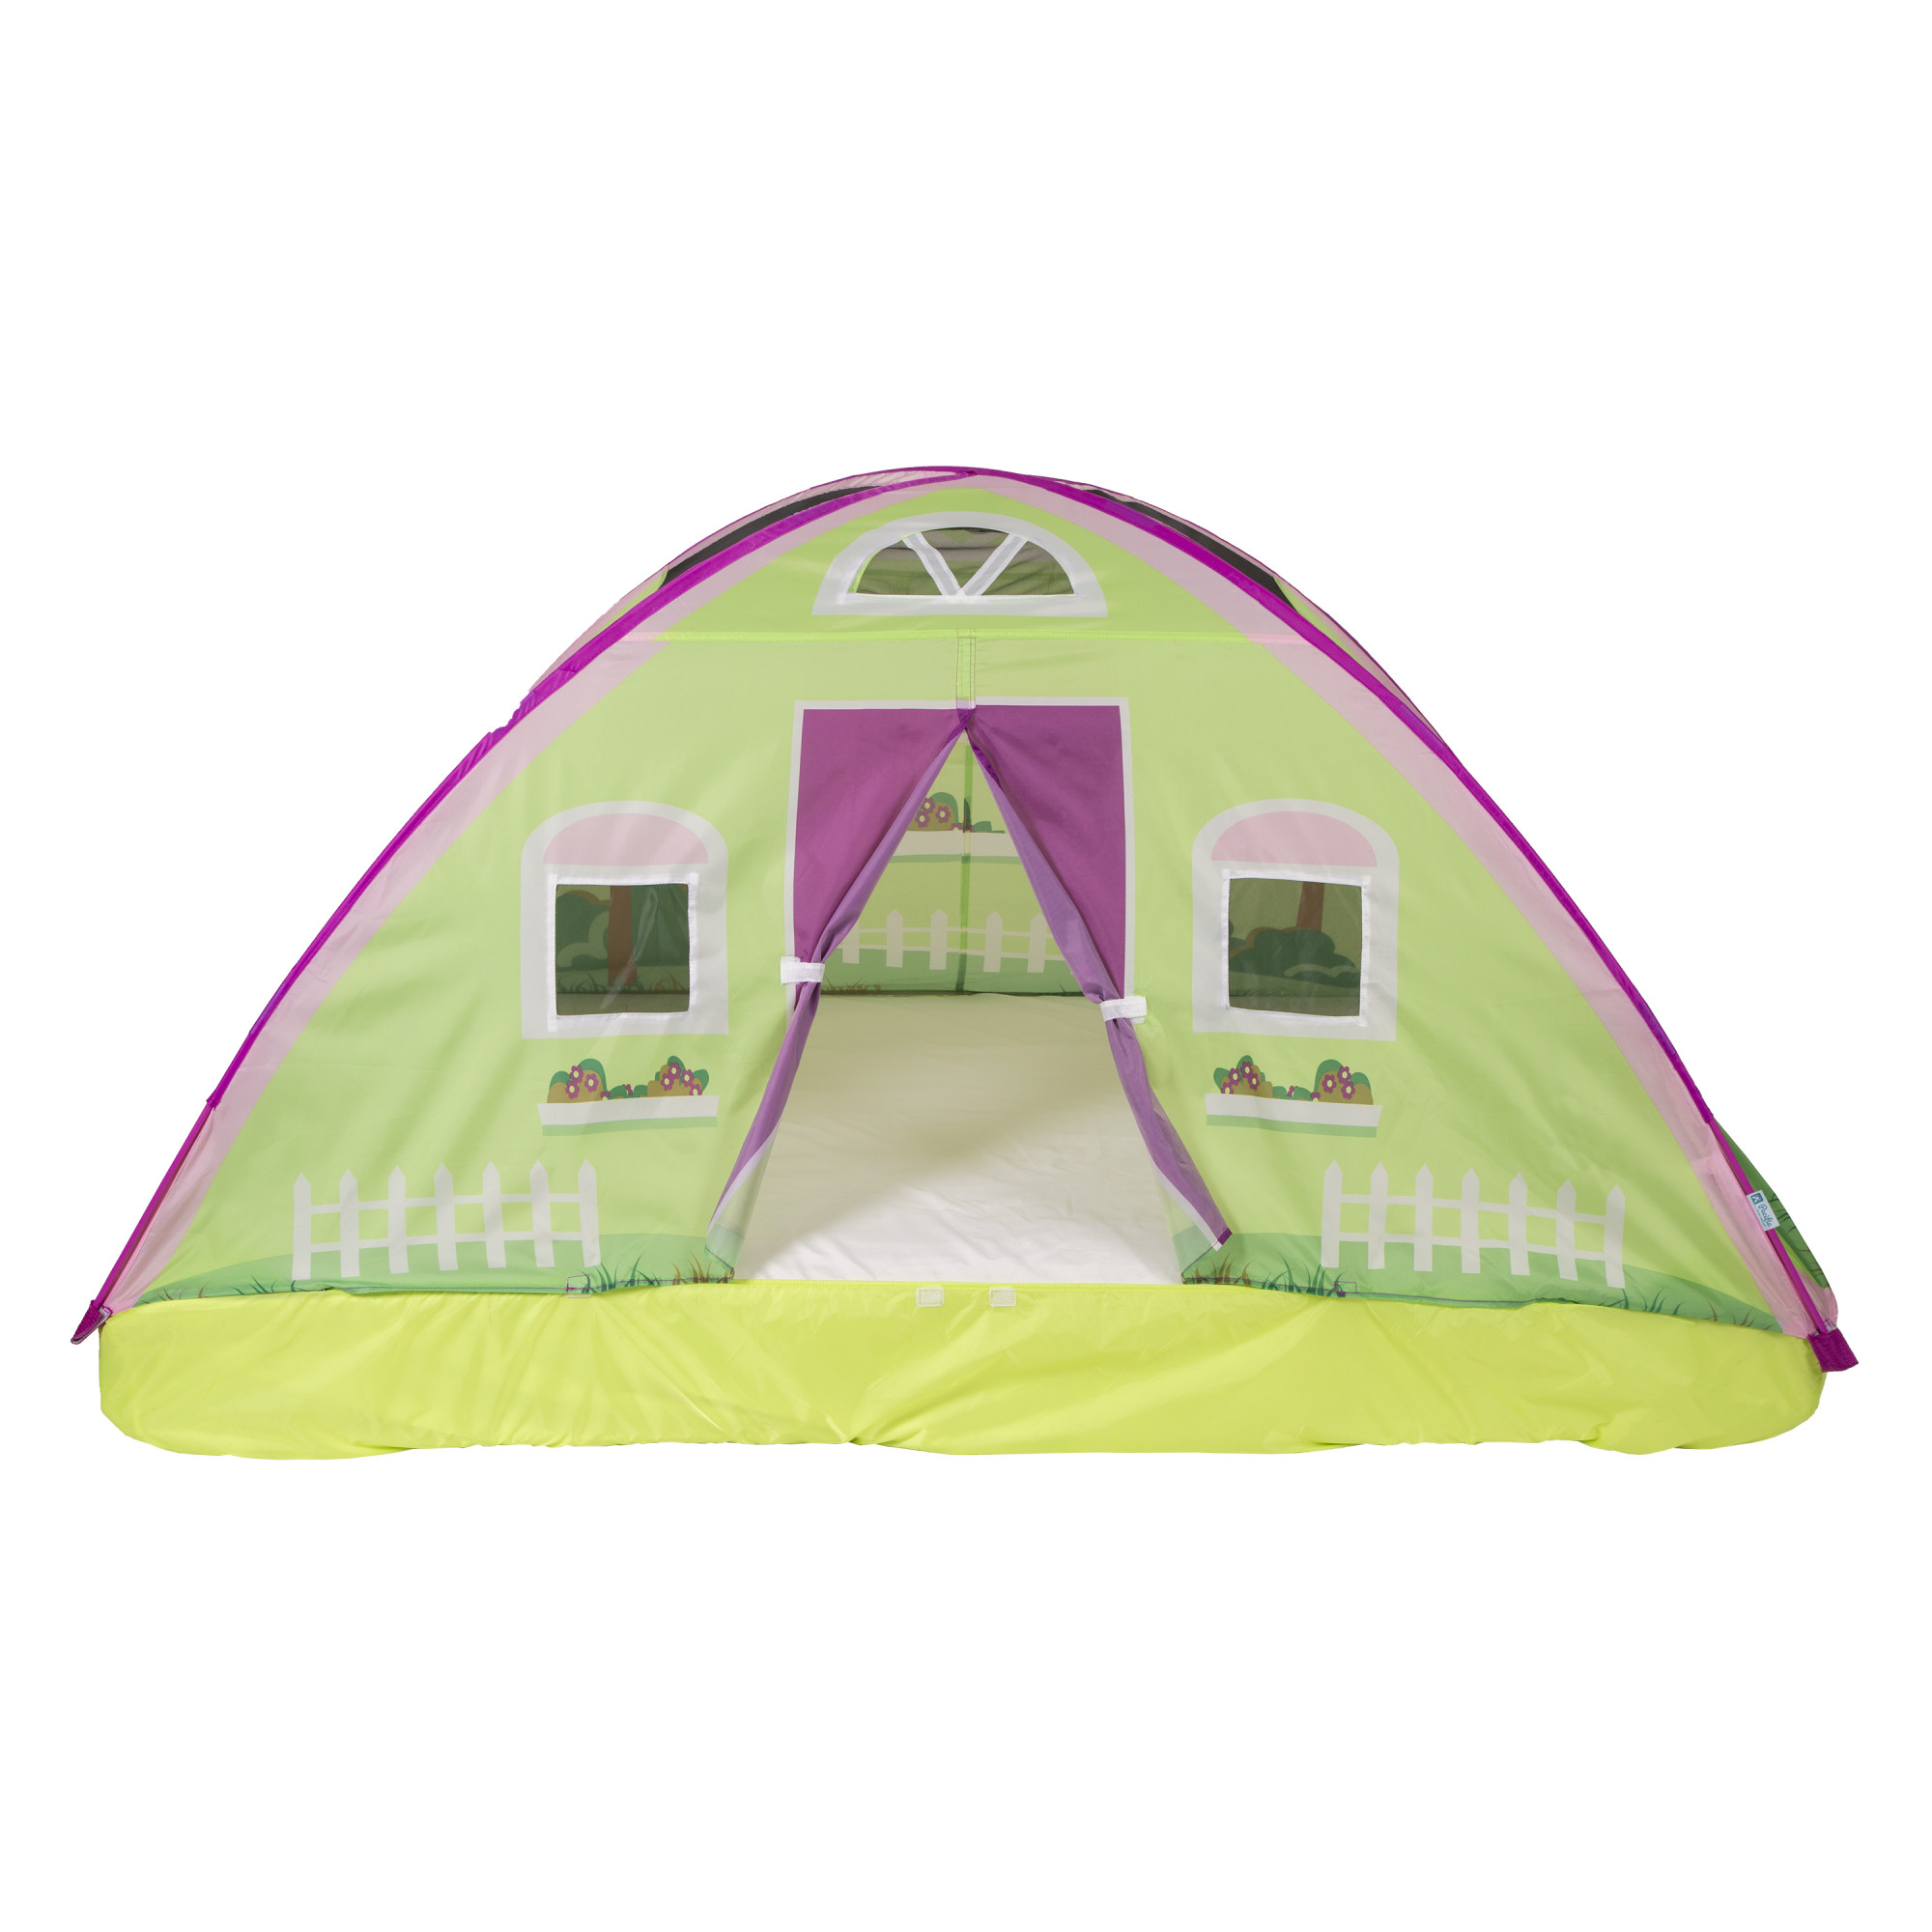 Pacific Play Tents Cottage Bed Tent, Twin - image 5 of 17